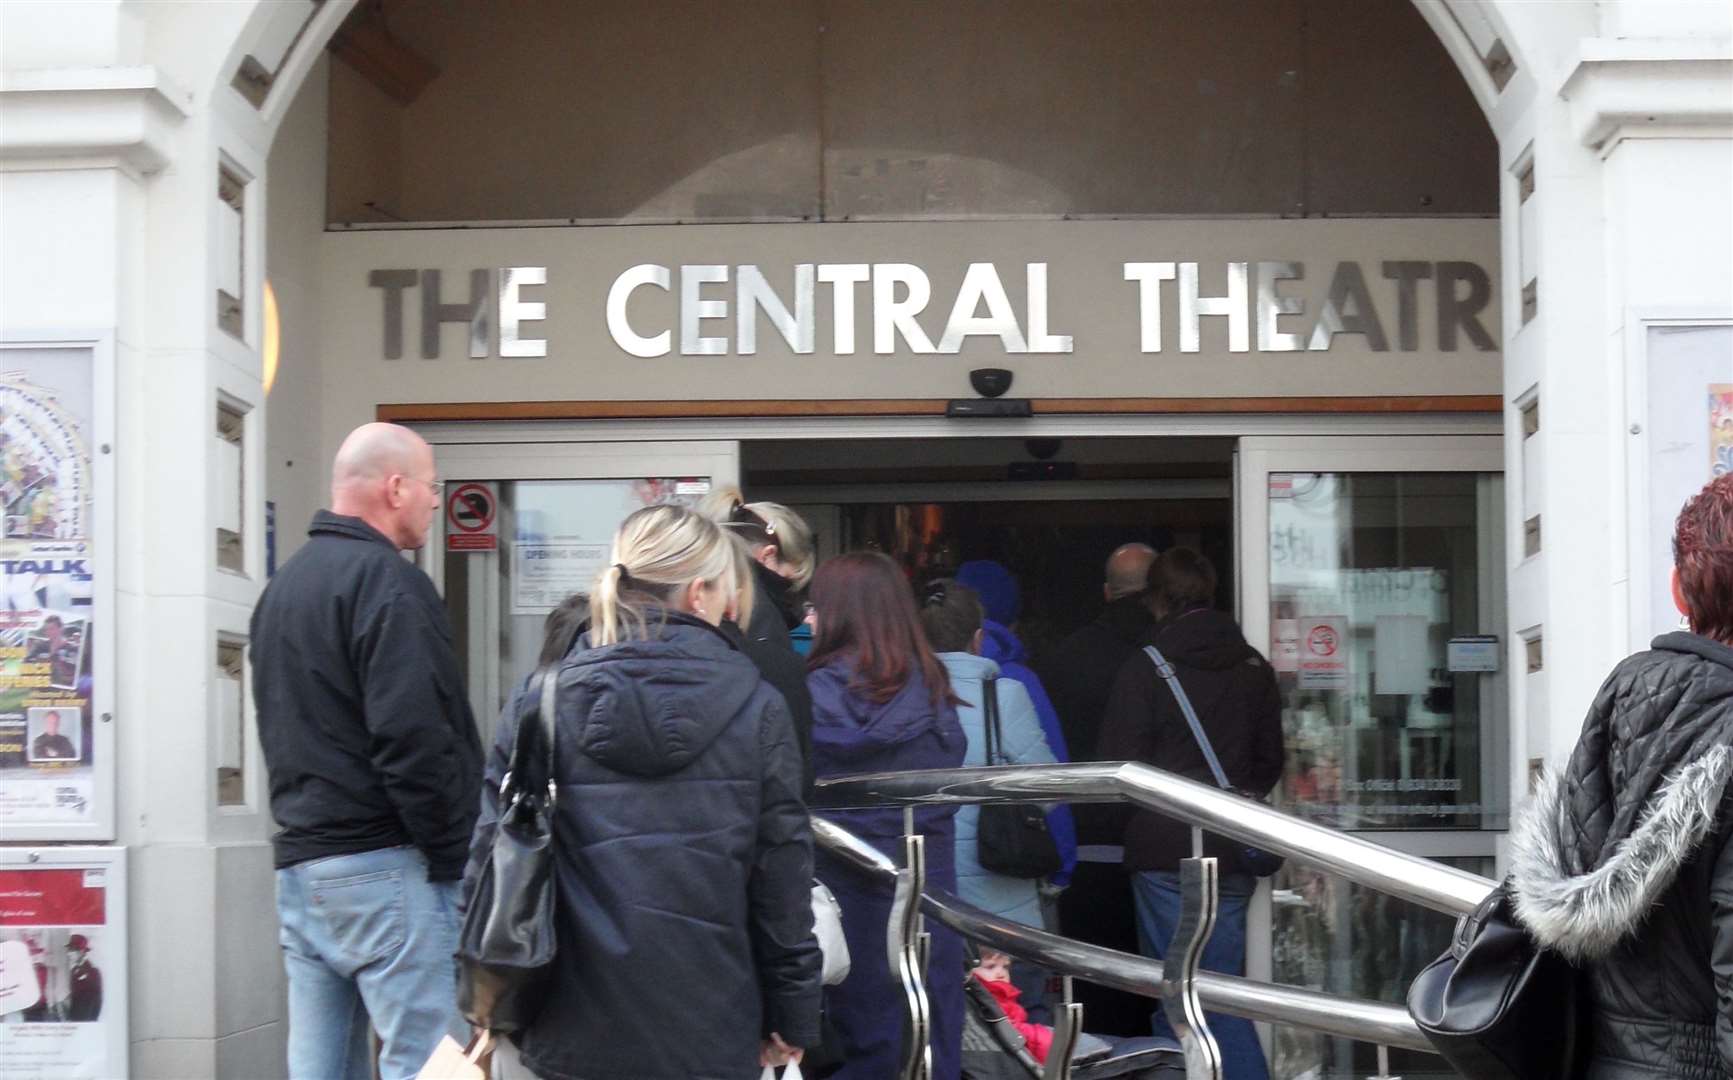 Chatham’s Central Theatre is named after the building’s history as the Methodist Central Church